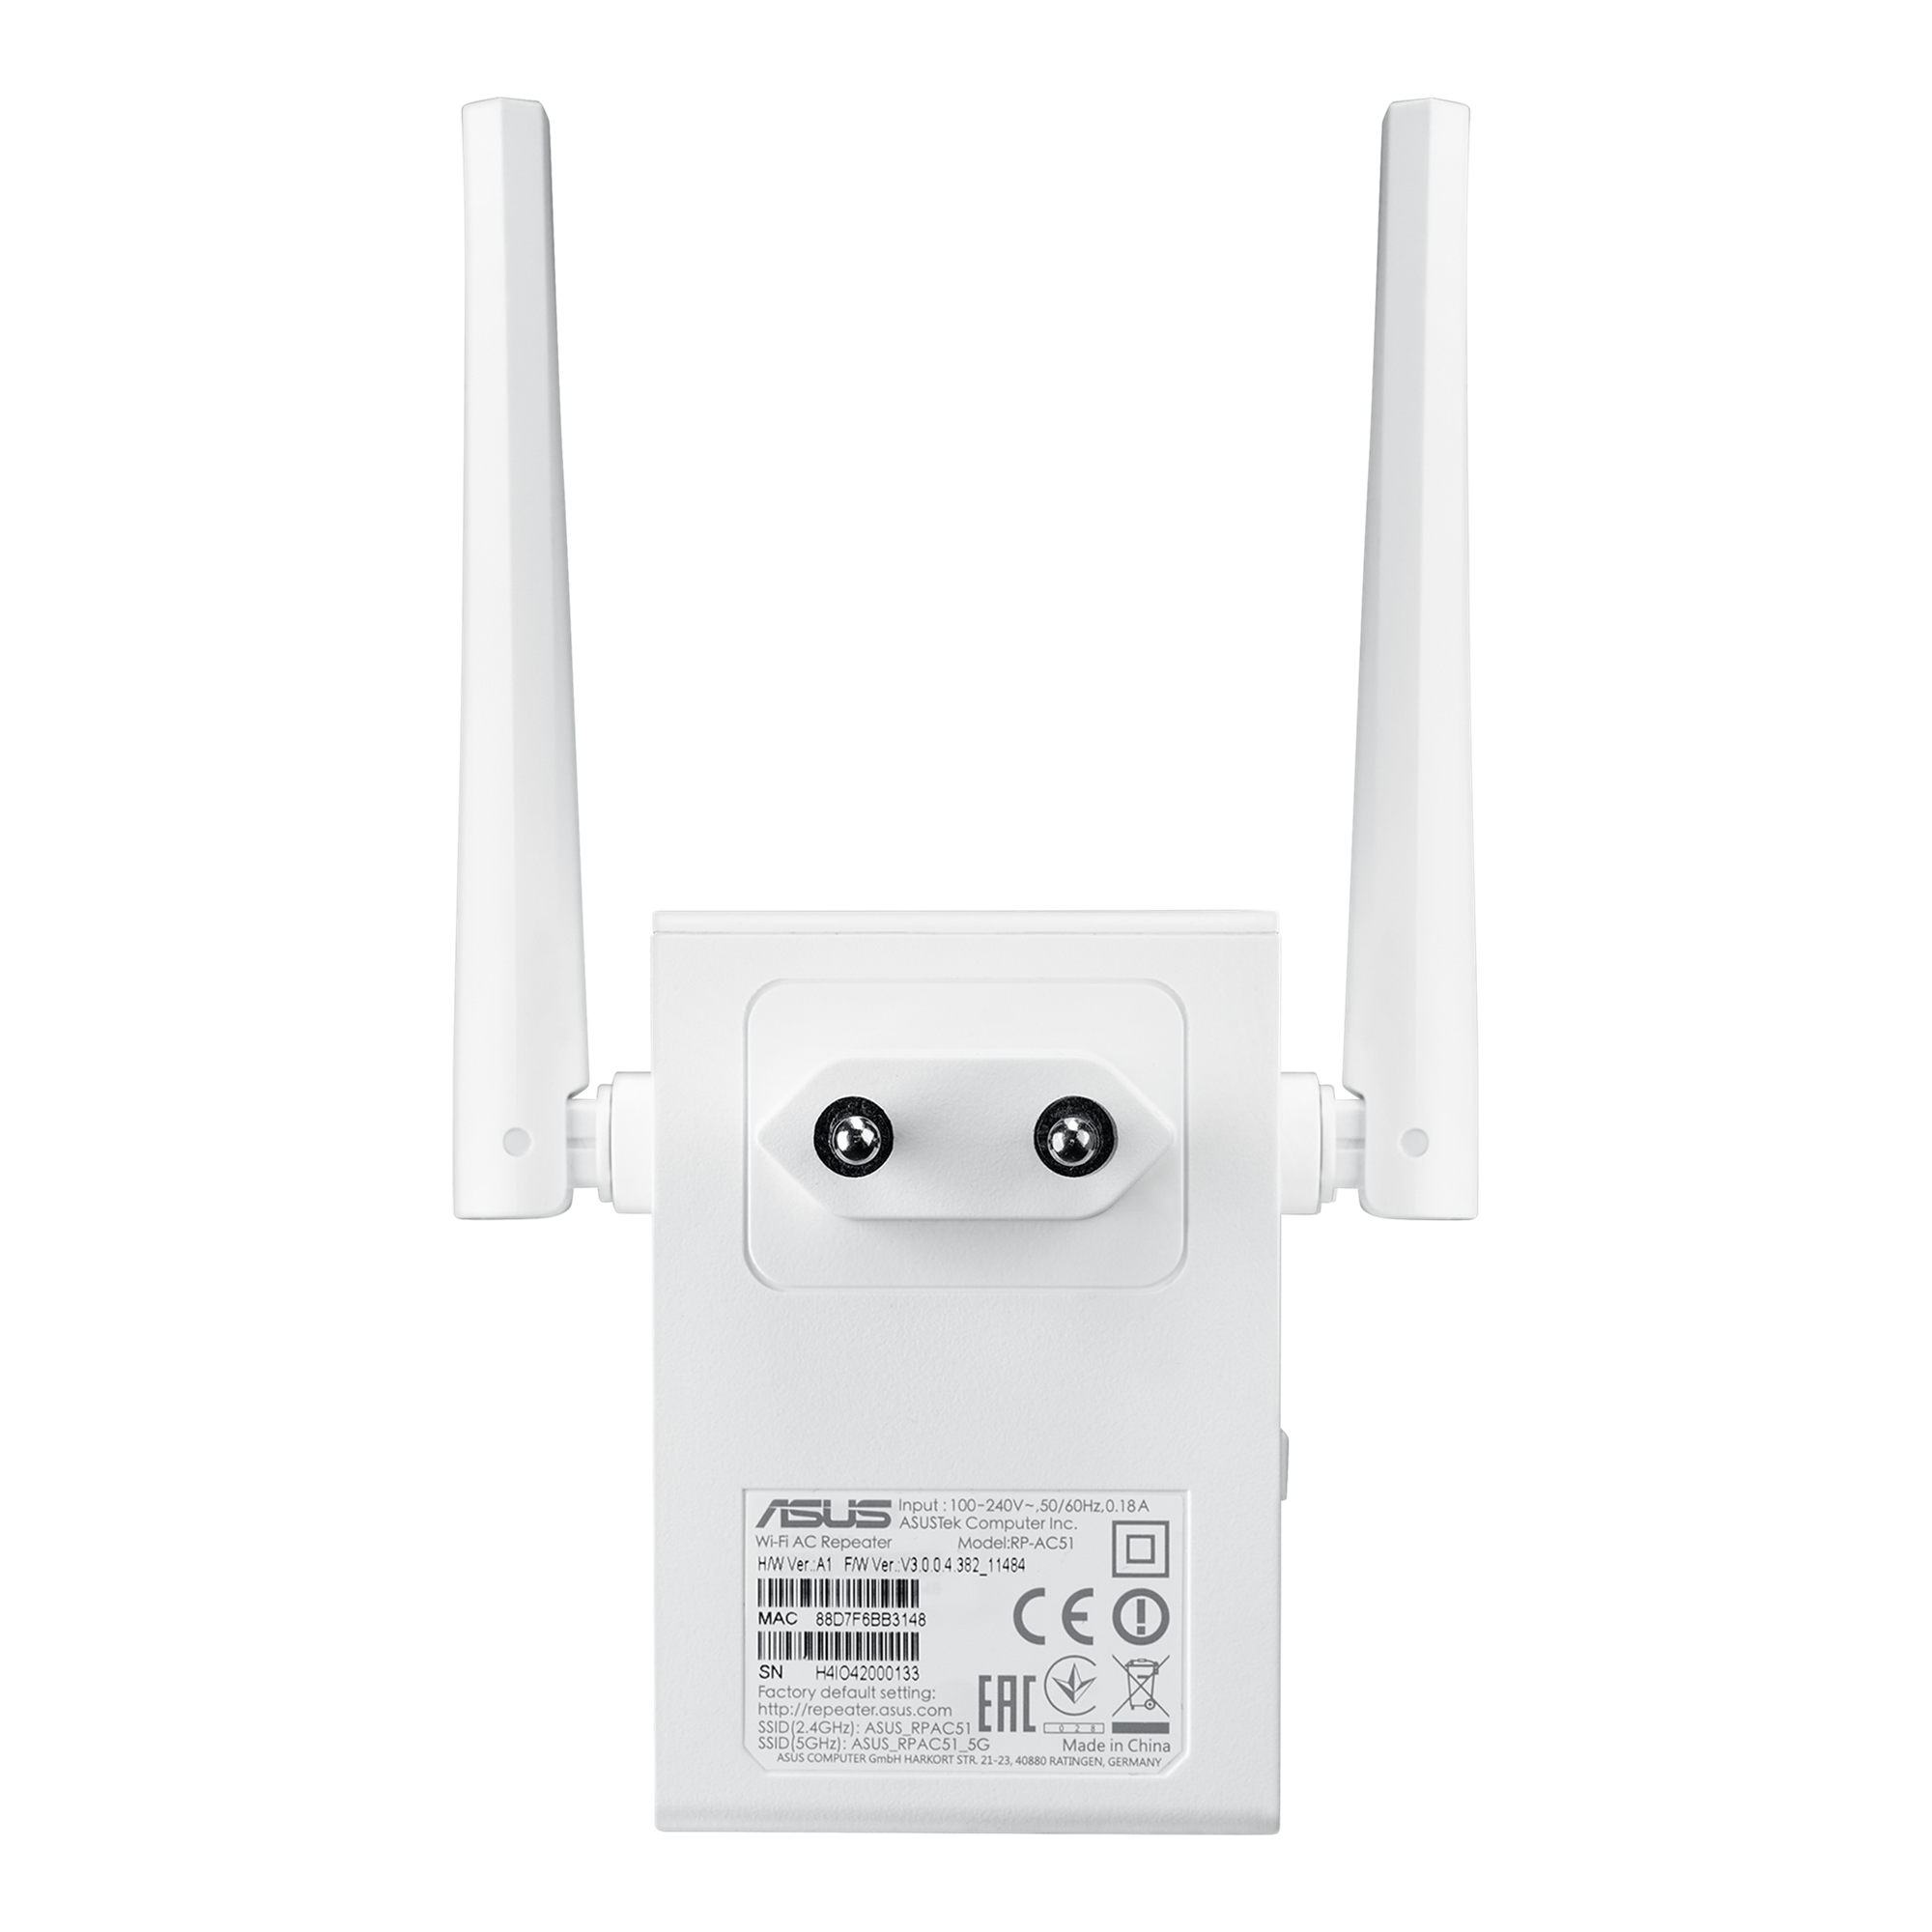 N300 Portable Wi-Fi Range Extender - China WiFi Repeater, Repeater